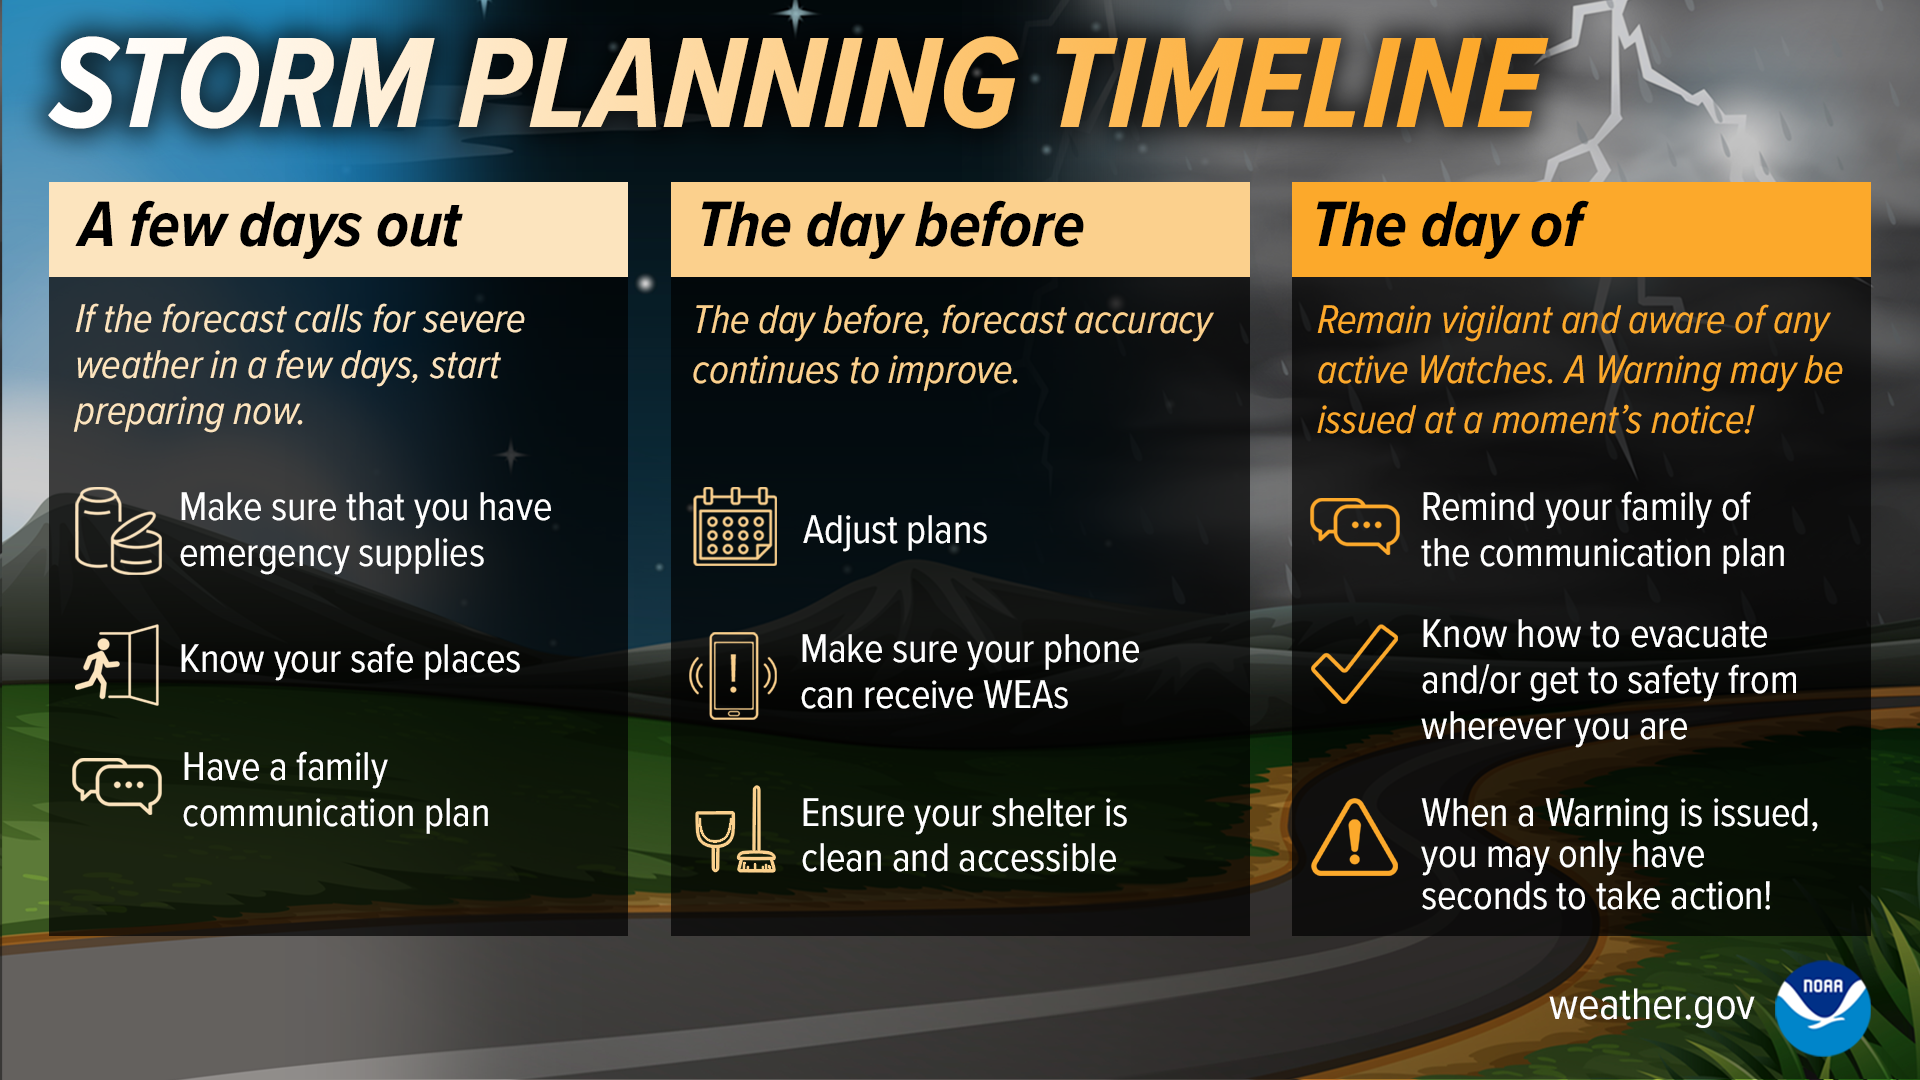 Storm Planning Timeline. If the forecast calls for severe weather in a few days, start preparing now: make sure that you have emergency supplies; know your safe places; have a family communications plan. The day before, forecast accuracy continues to improve: adjust plans; make sure your phone can receive WEAs; ensure your shelter is clean and accessible. The day of, remain vigilant and aware of any active Watches - a Warning may be issued at a moment's notice: remind your family of the communication plan; know how to evacuation and/or get to safety from wherever you are; whenever a Warning is issued, you may only have seconds to take action!